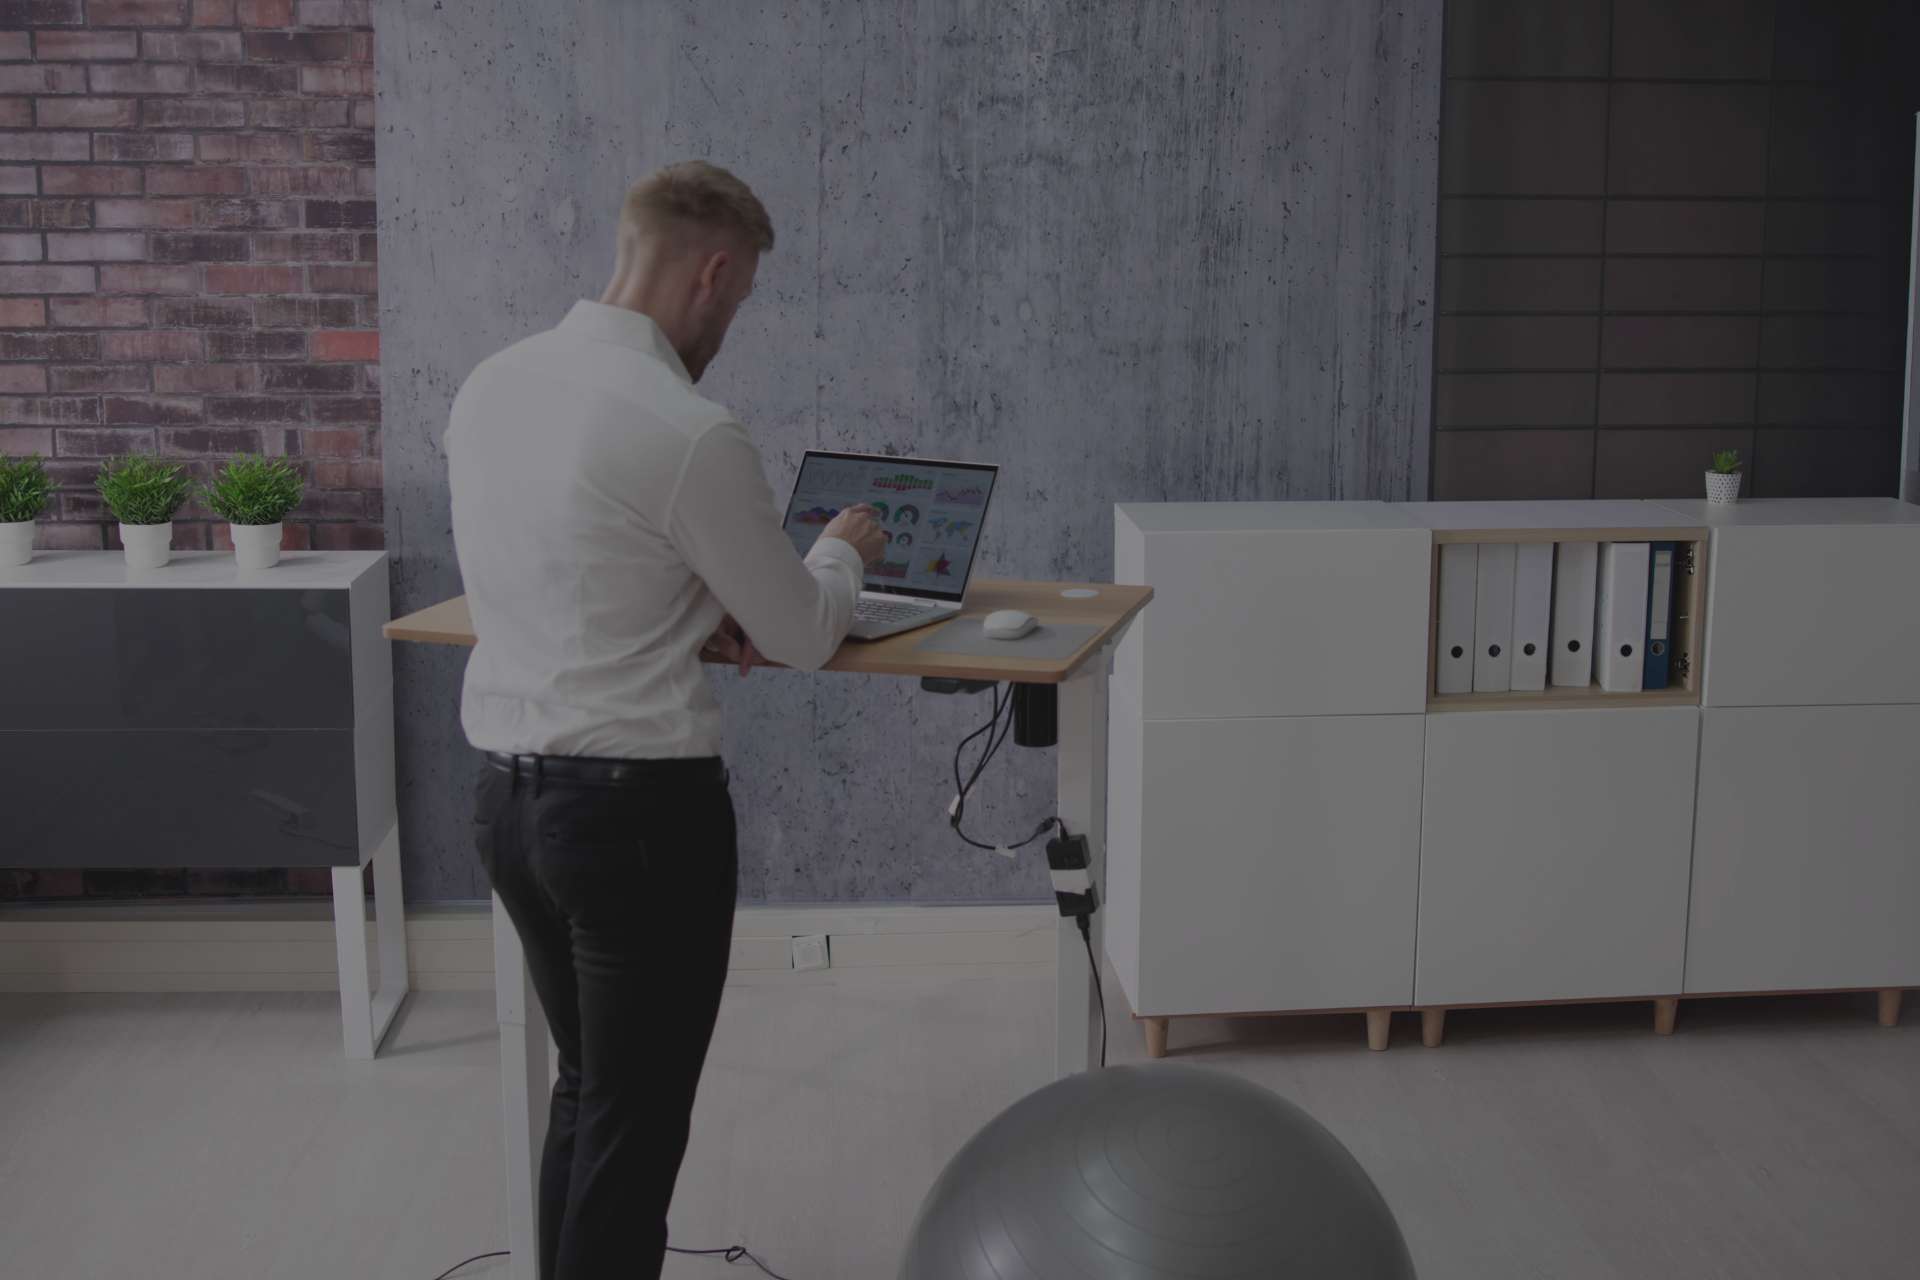 Standing Desks: Are They Worth The Hype?